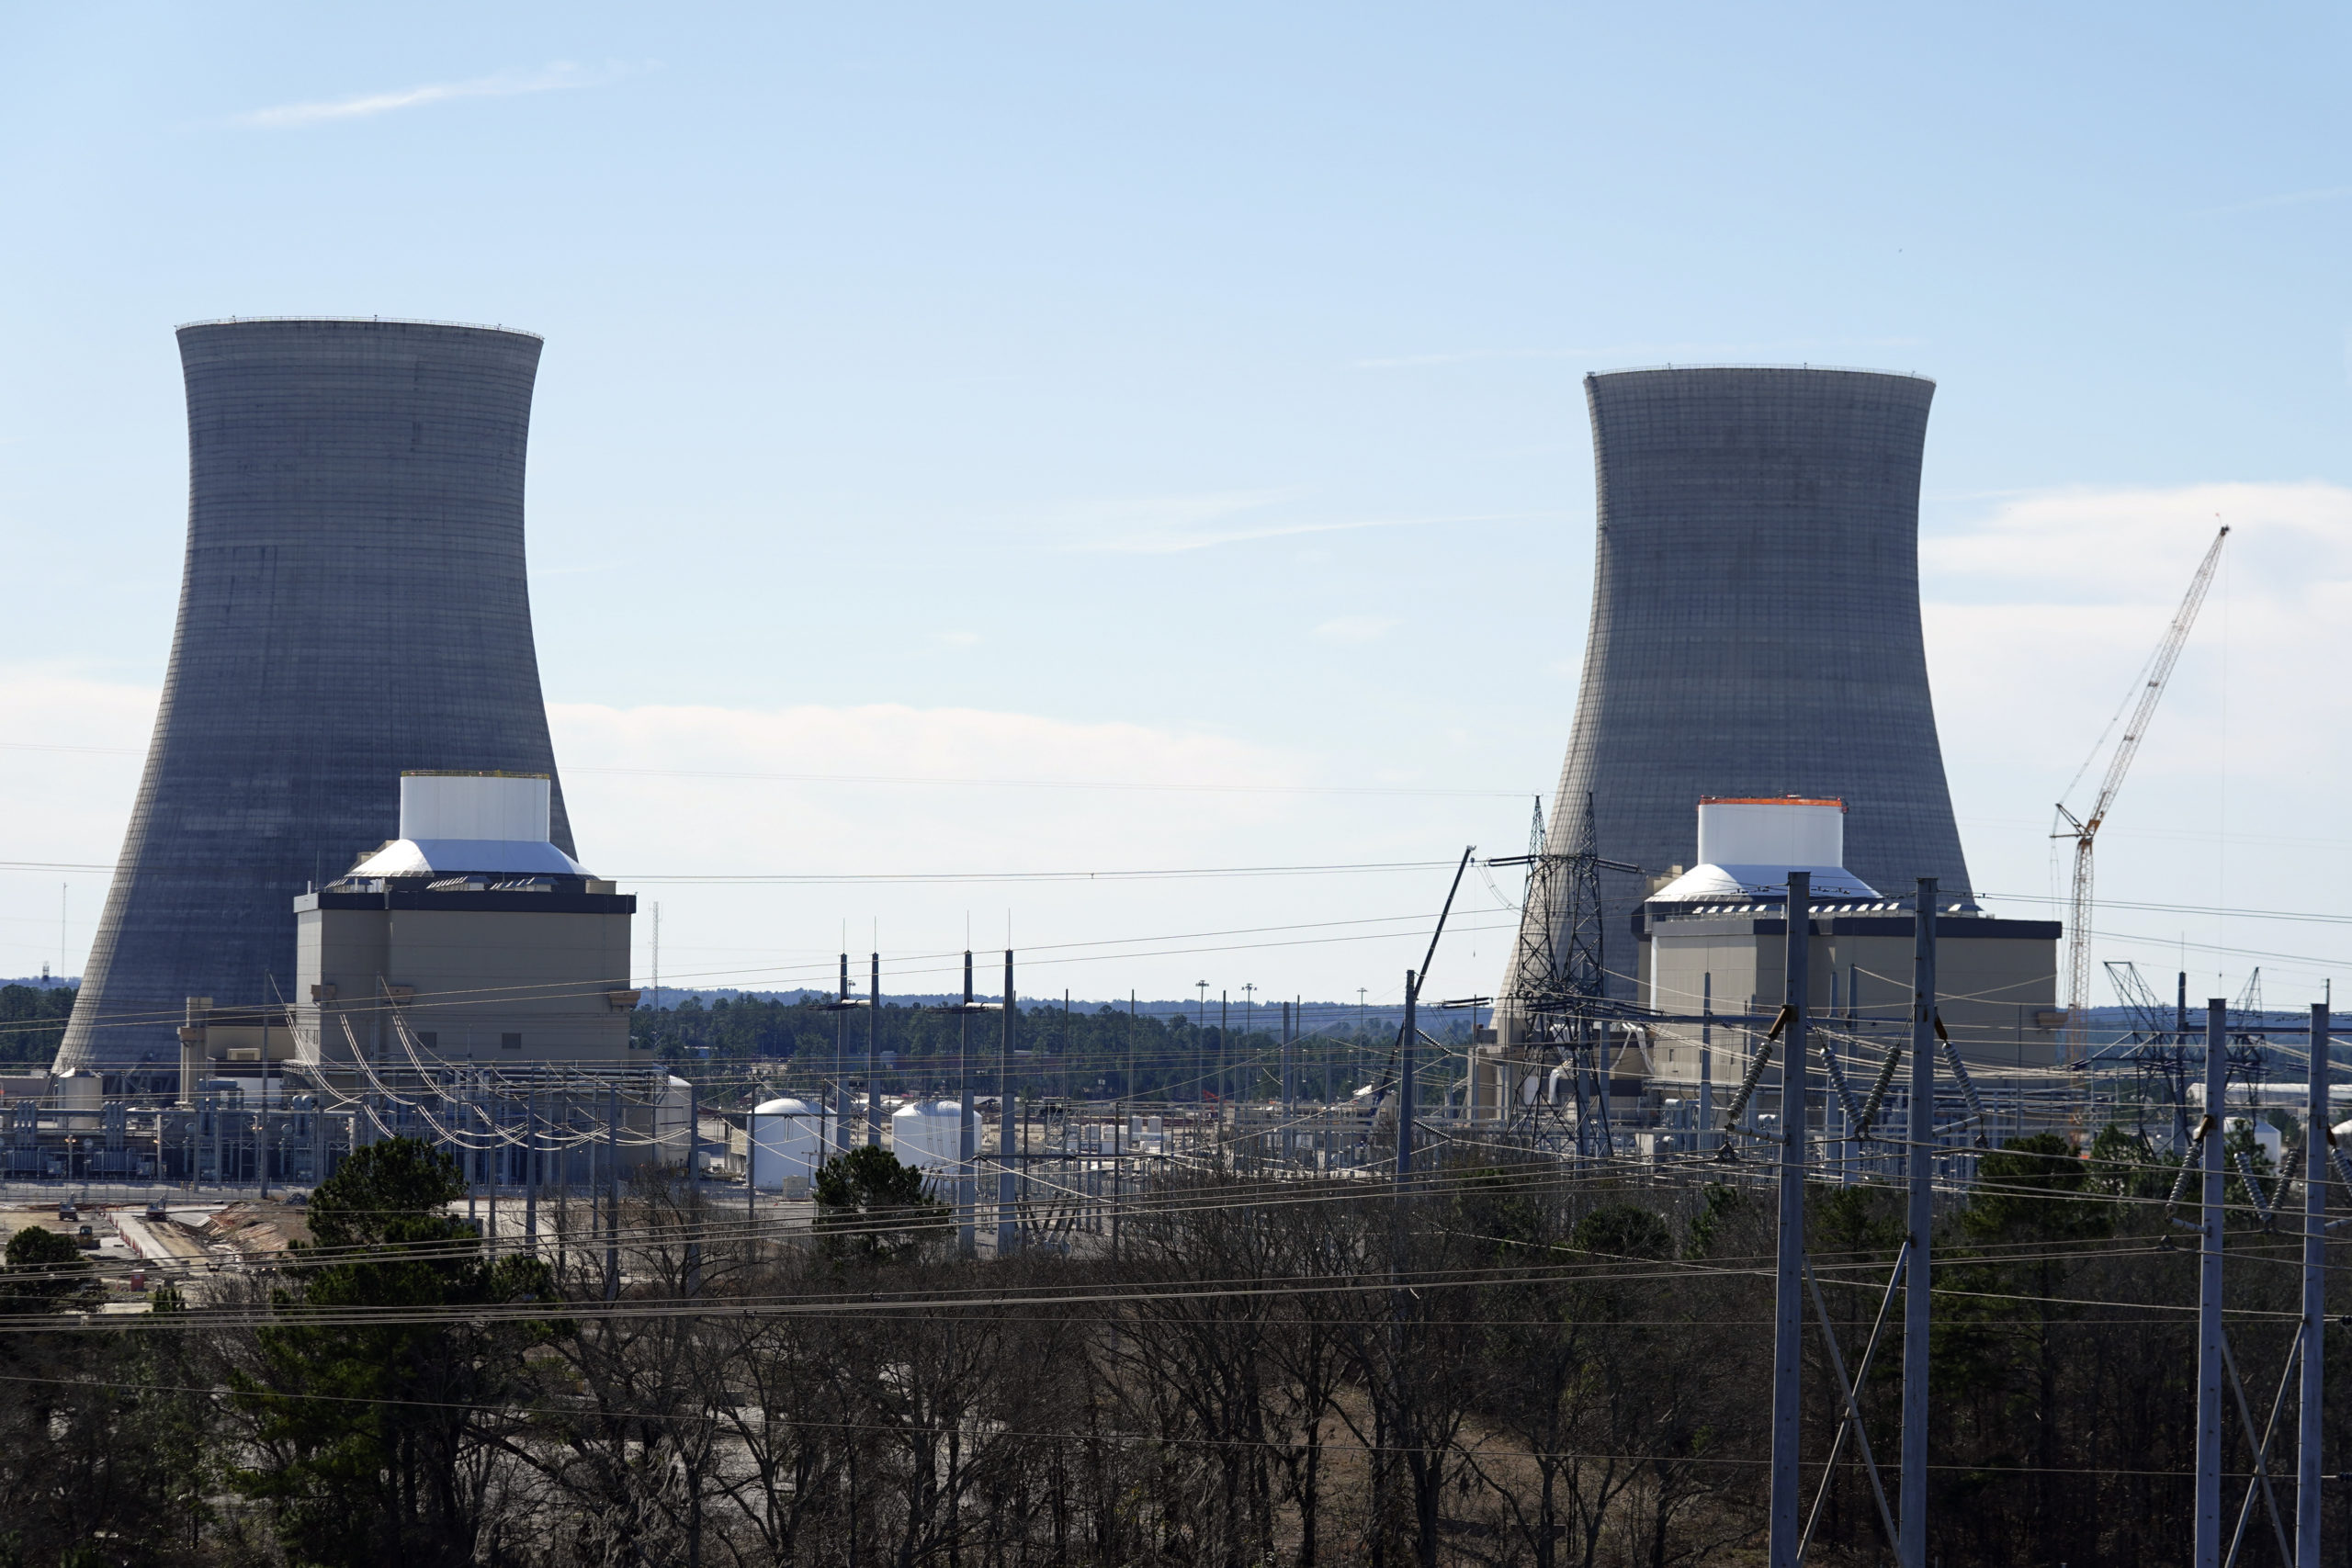 Units 3, left, and 4 and their cooling towers stand at Georgia Power Co.'s Plant Vogtle nuclear power plant, Jan. 20, 2023, in Waynesboro, Ga. (John Bazemore / AP)